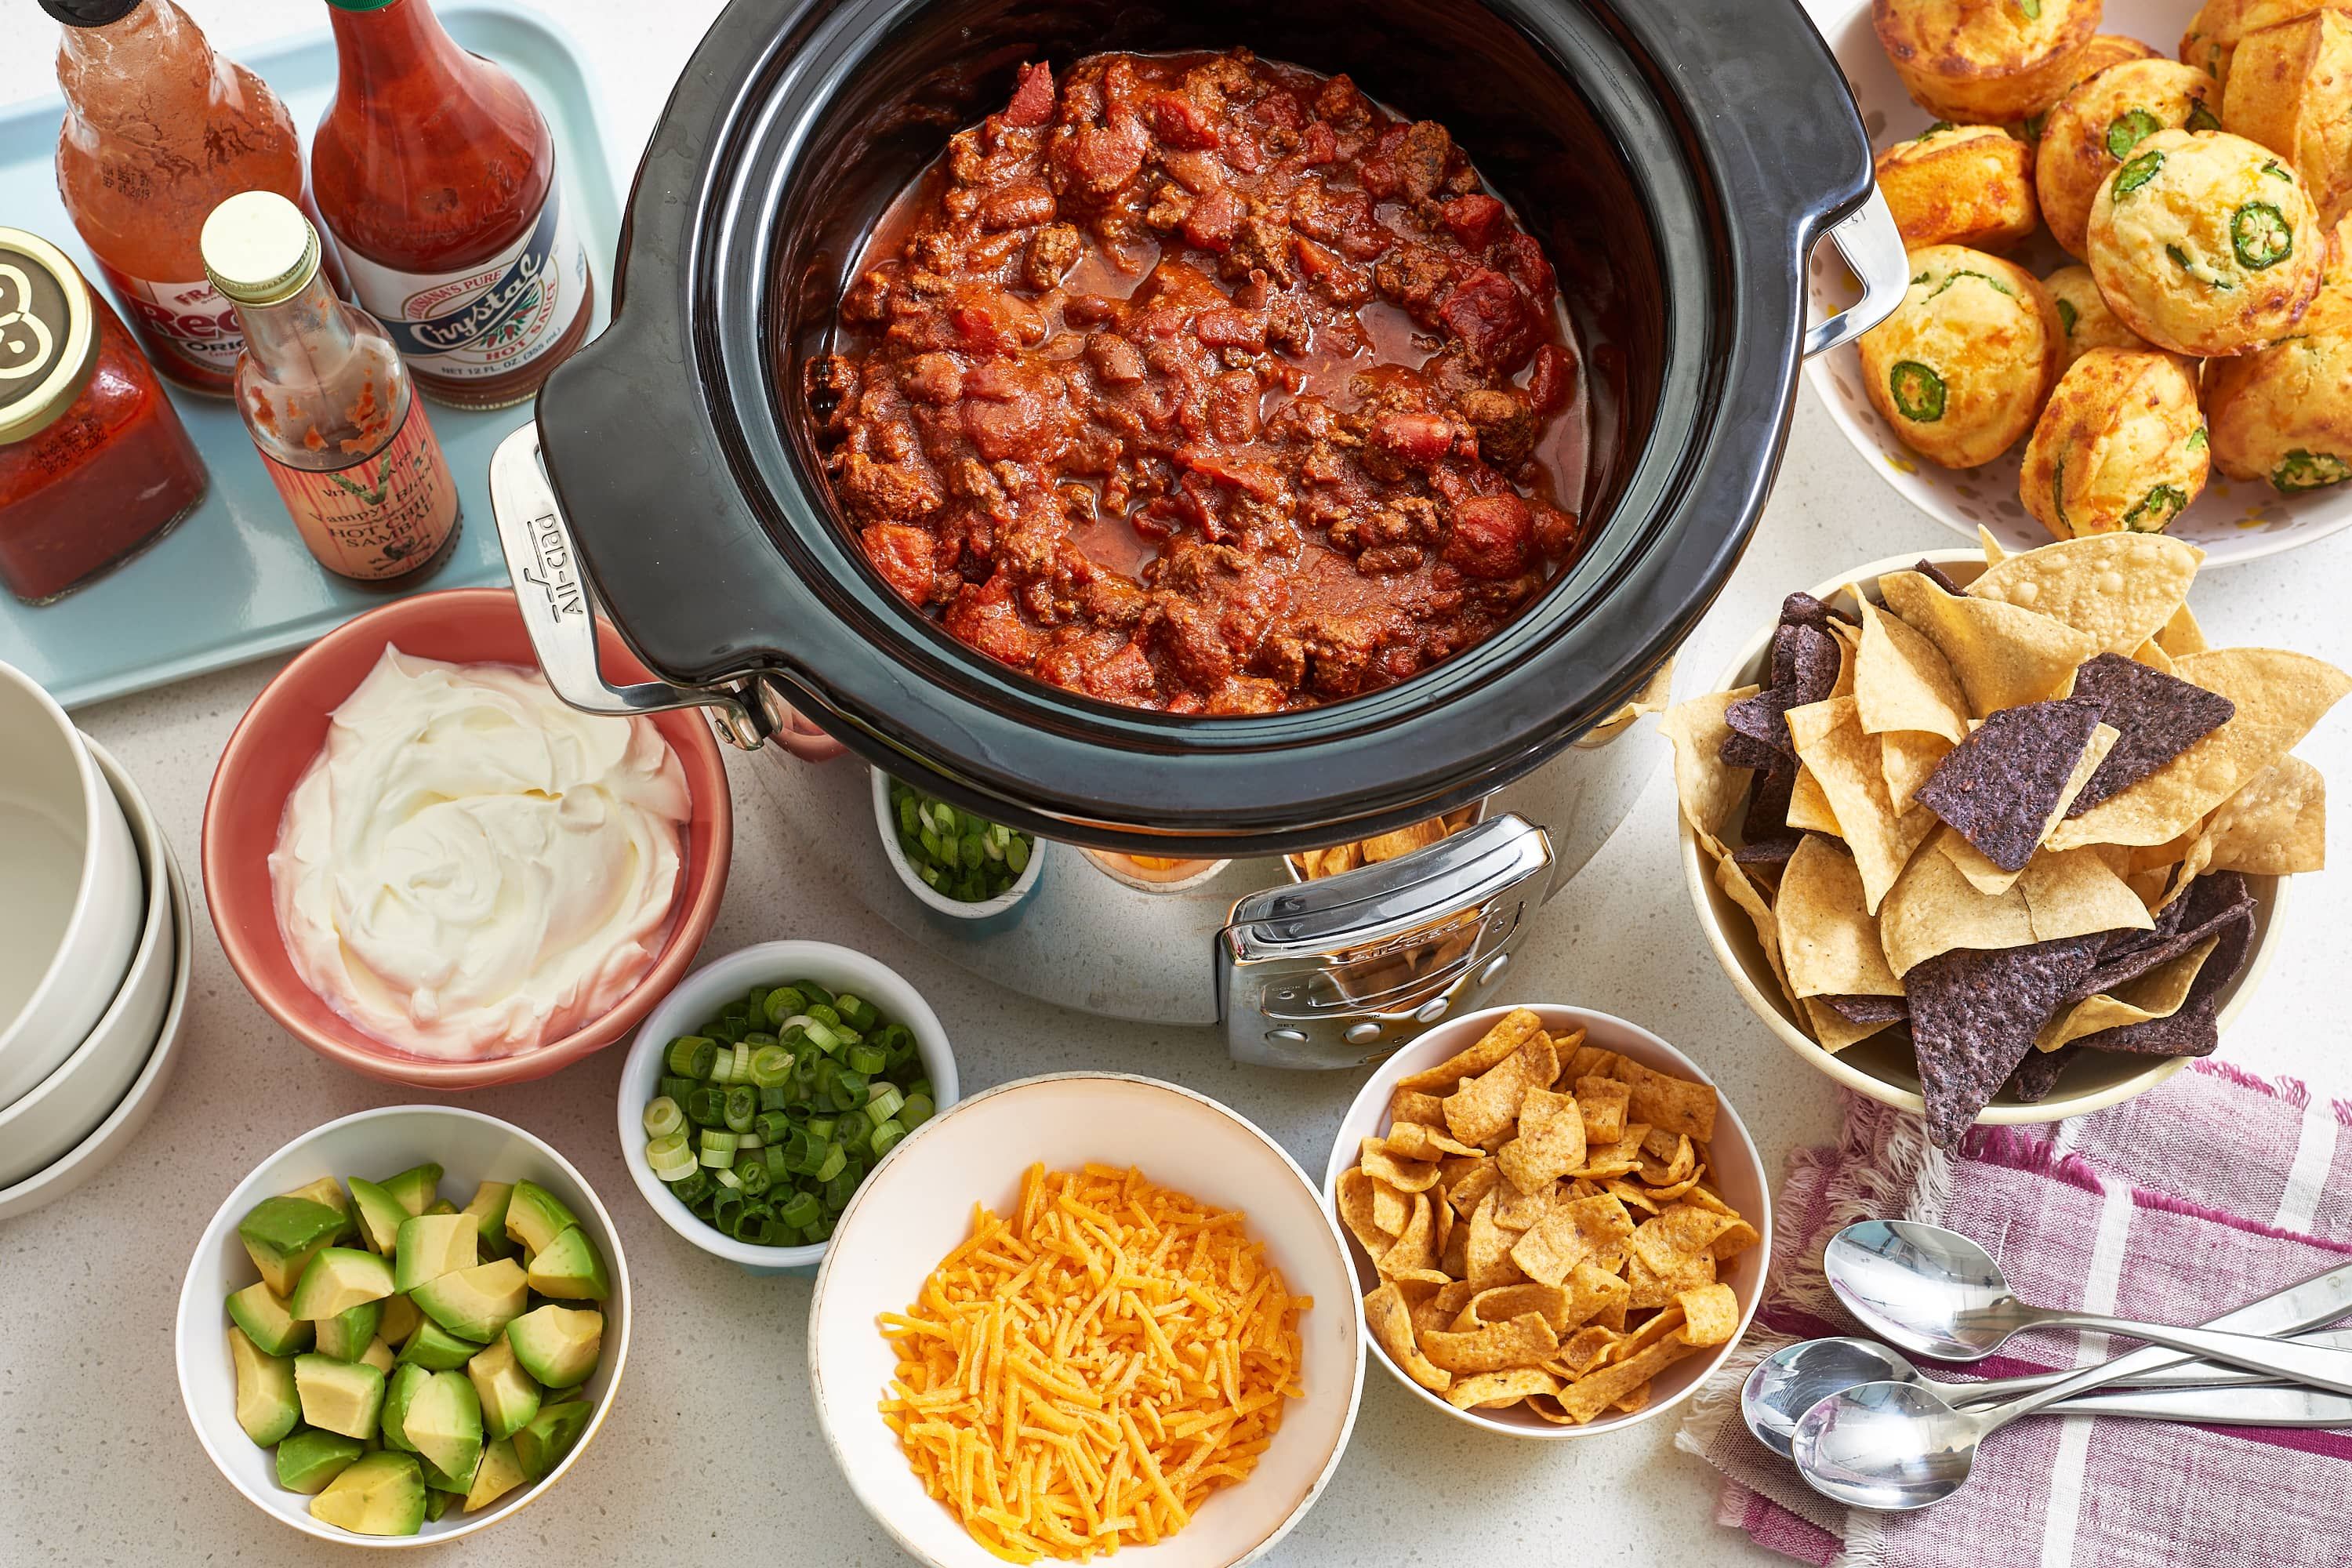 10 Tips for Setting Up an Awesome Chili Bar | Chili dinner, Chili bar, Chili bar party